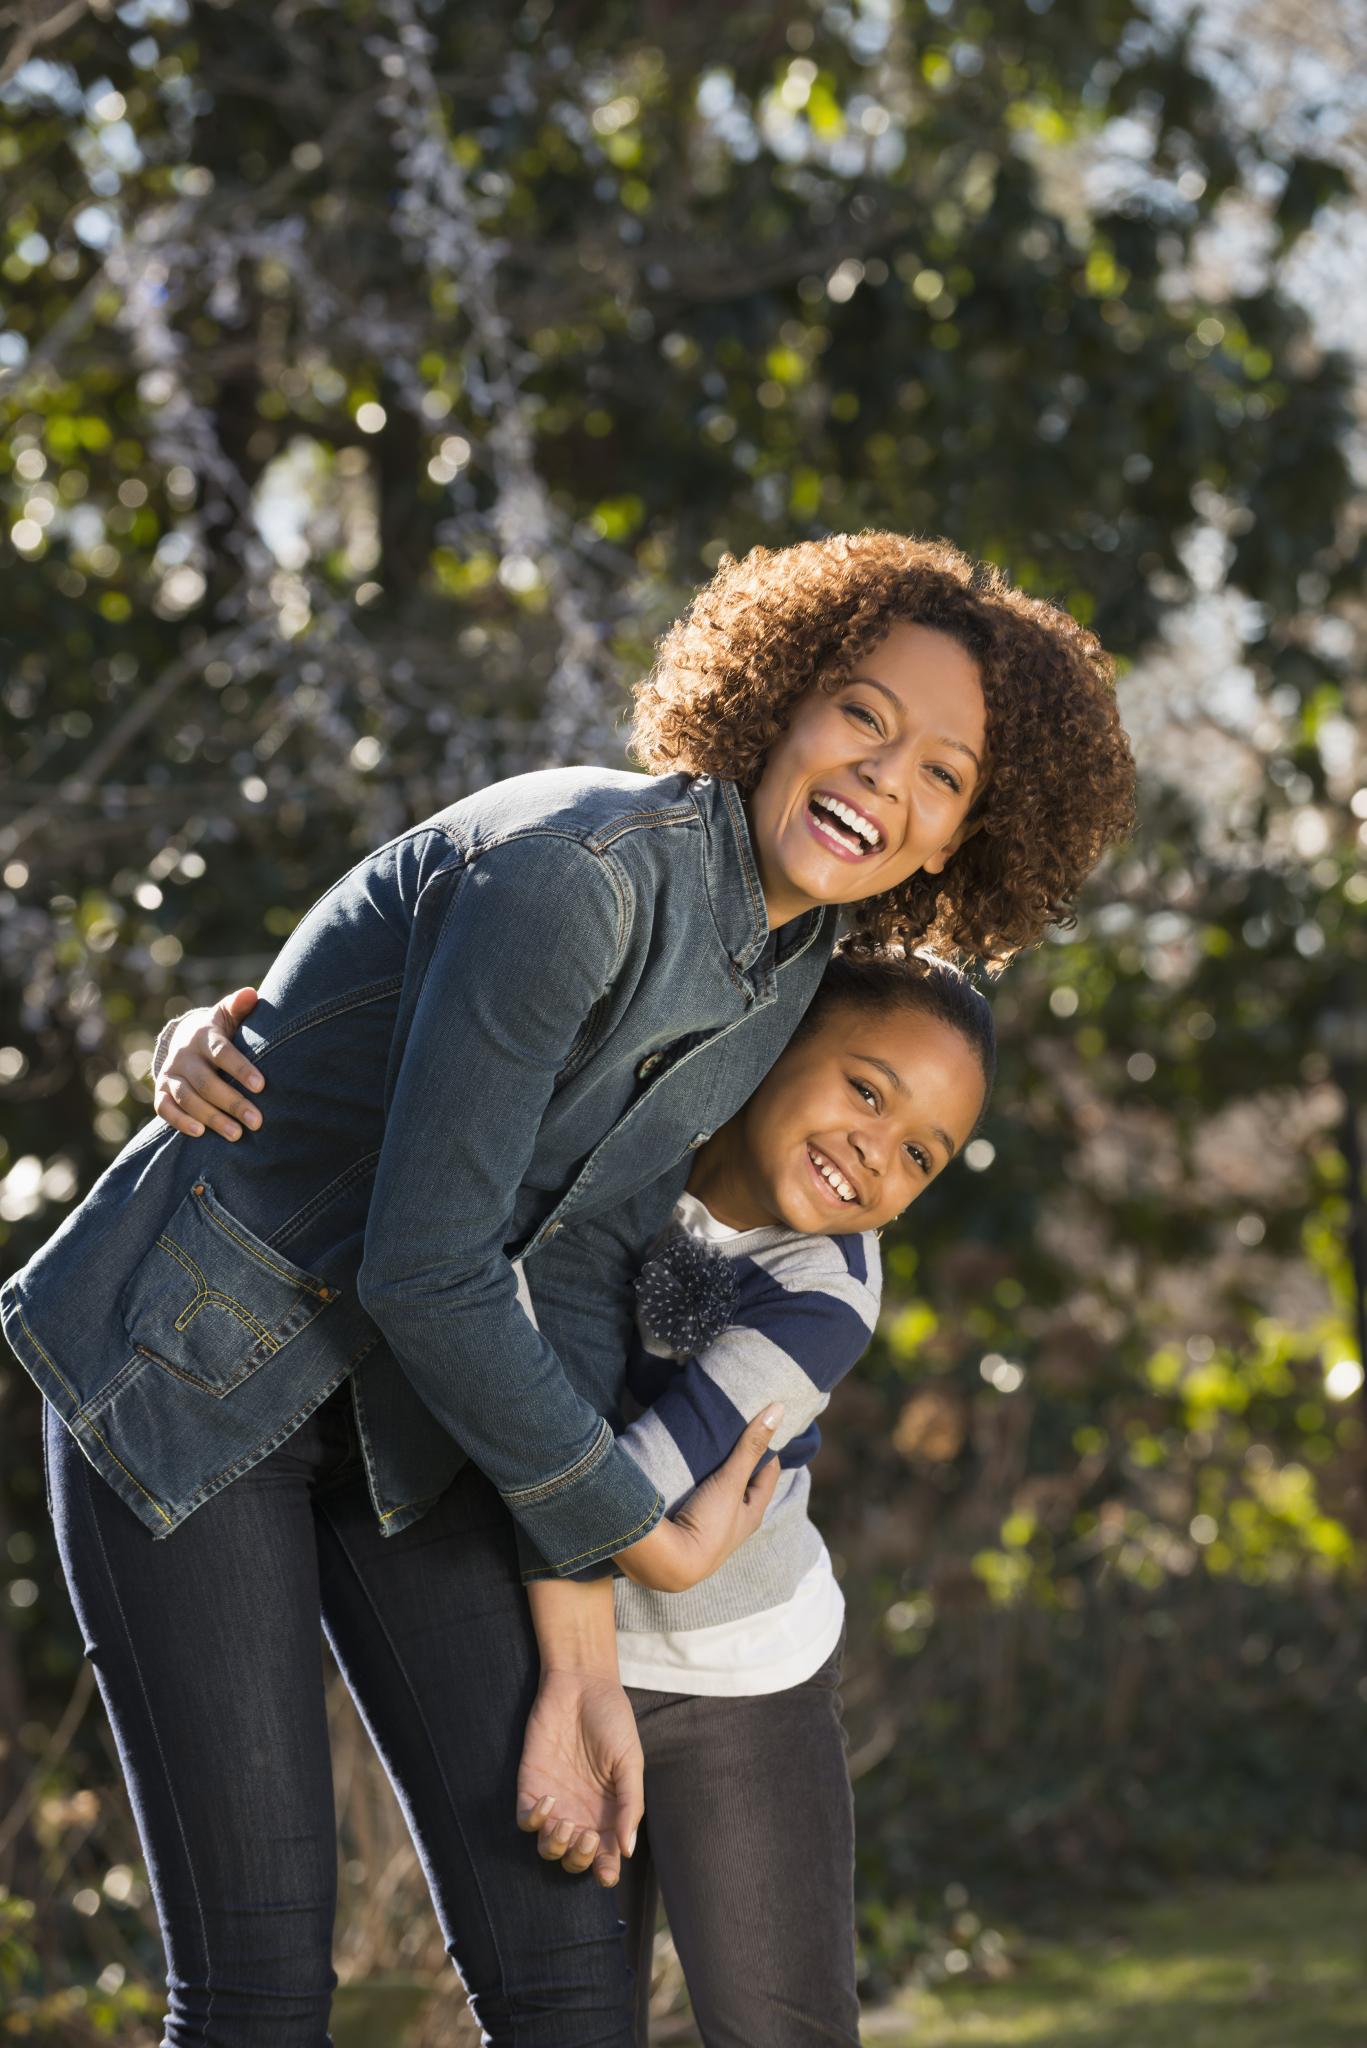 6 Resolutions Every Mom Should Make This Year